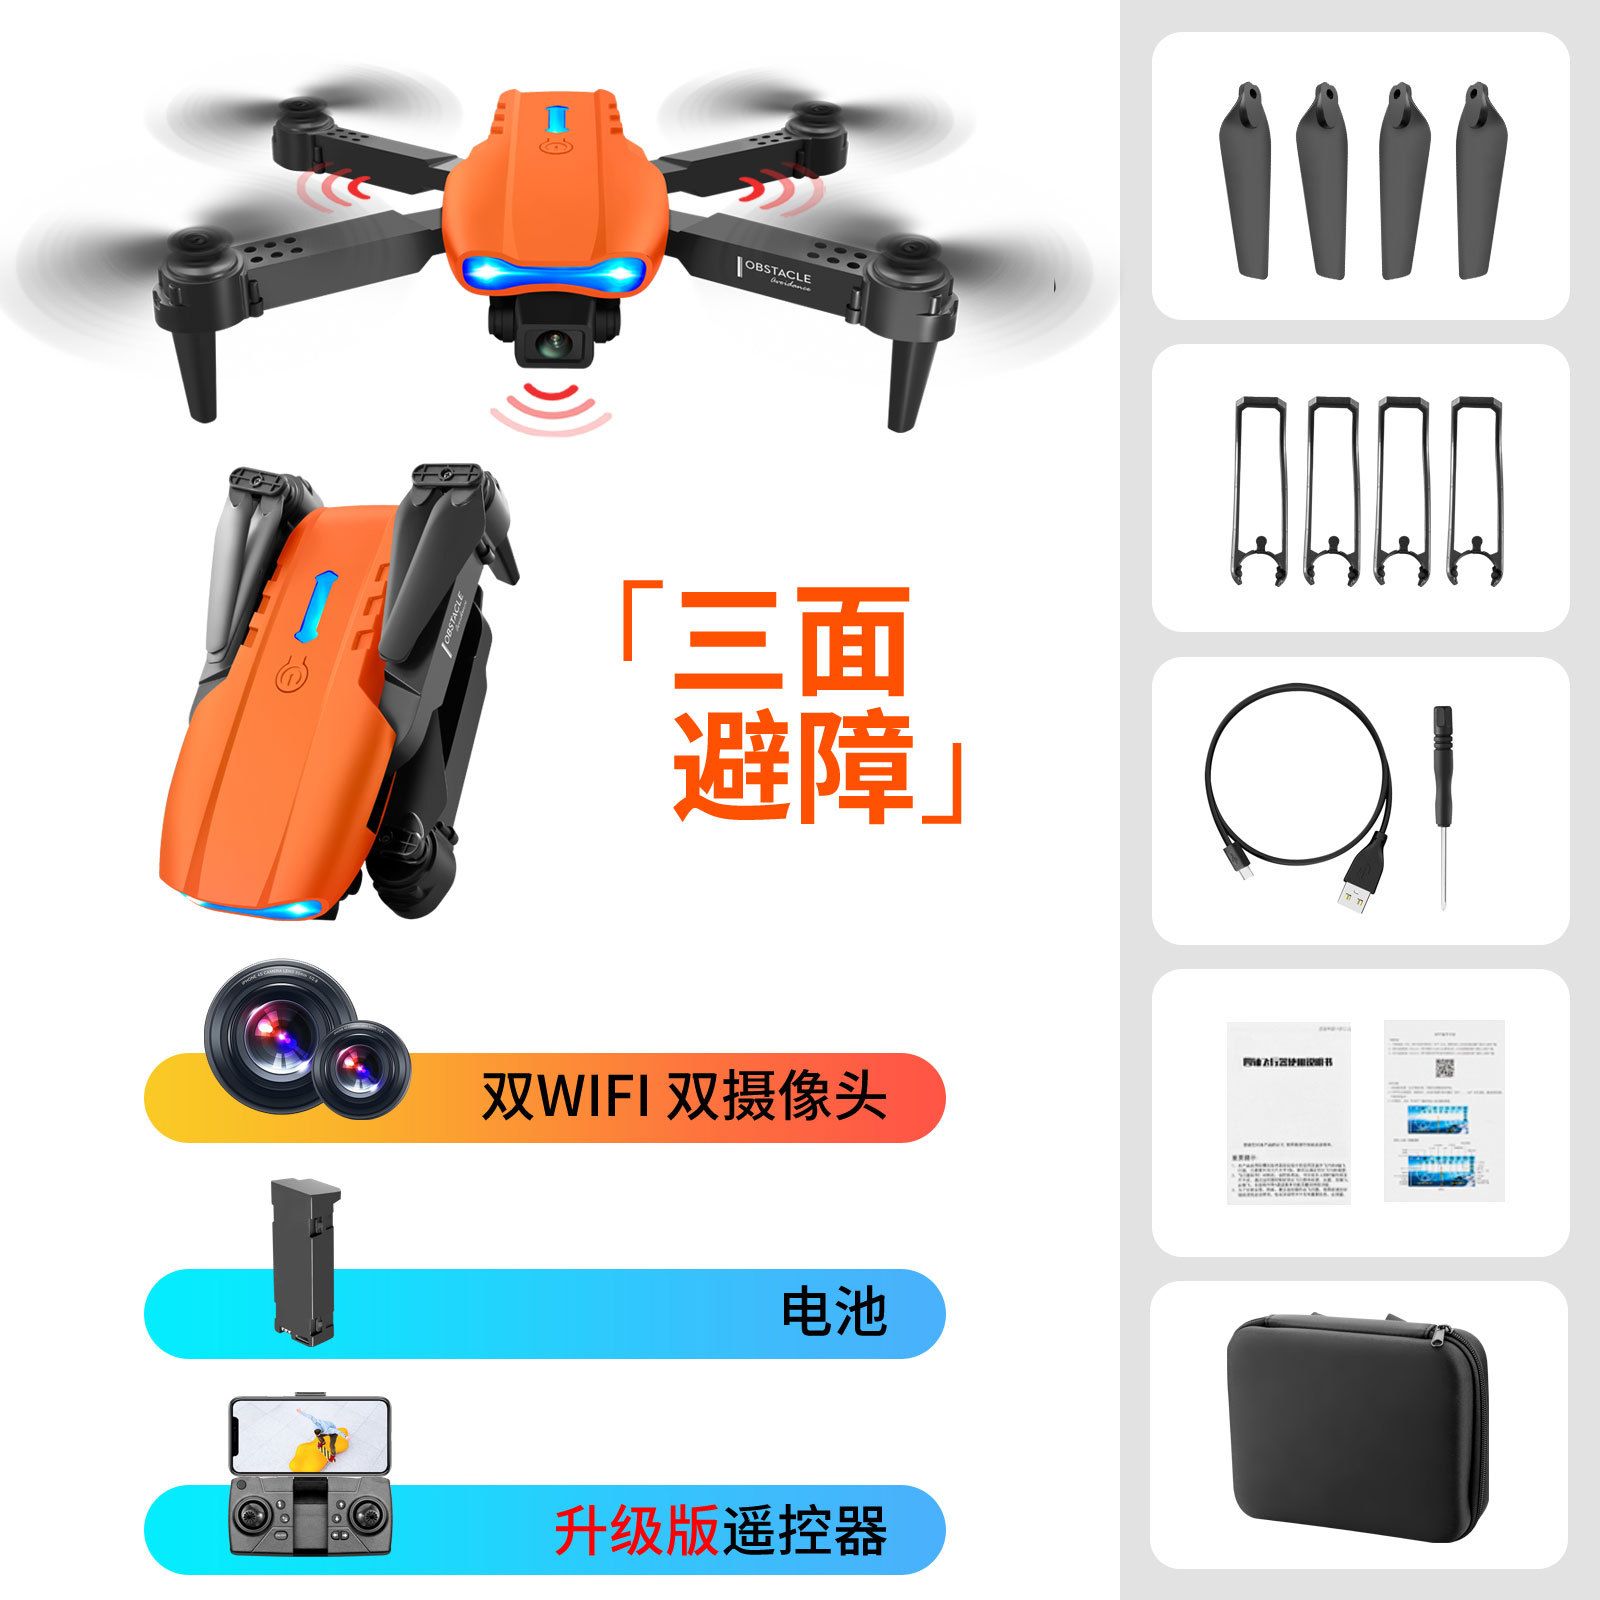 Orange obstacle avoidance dual camera